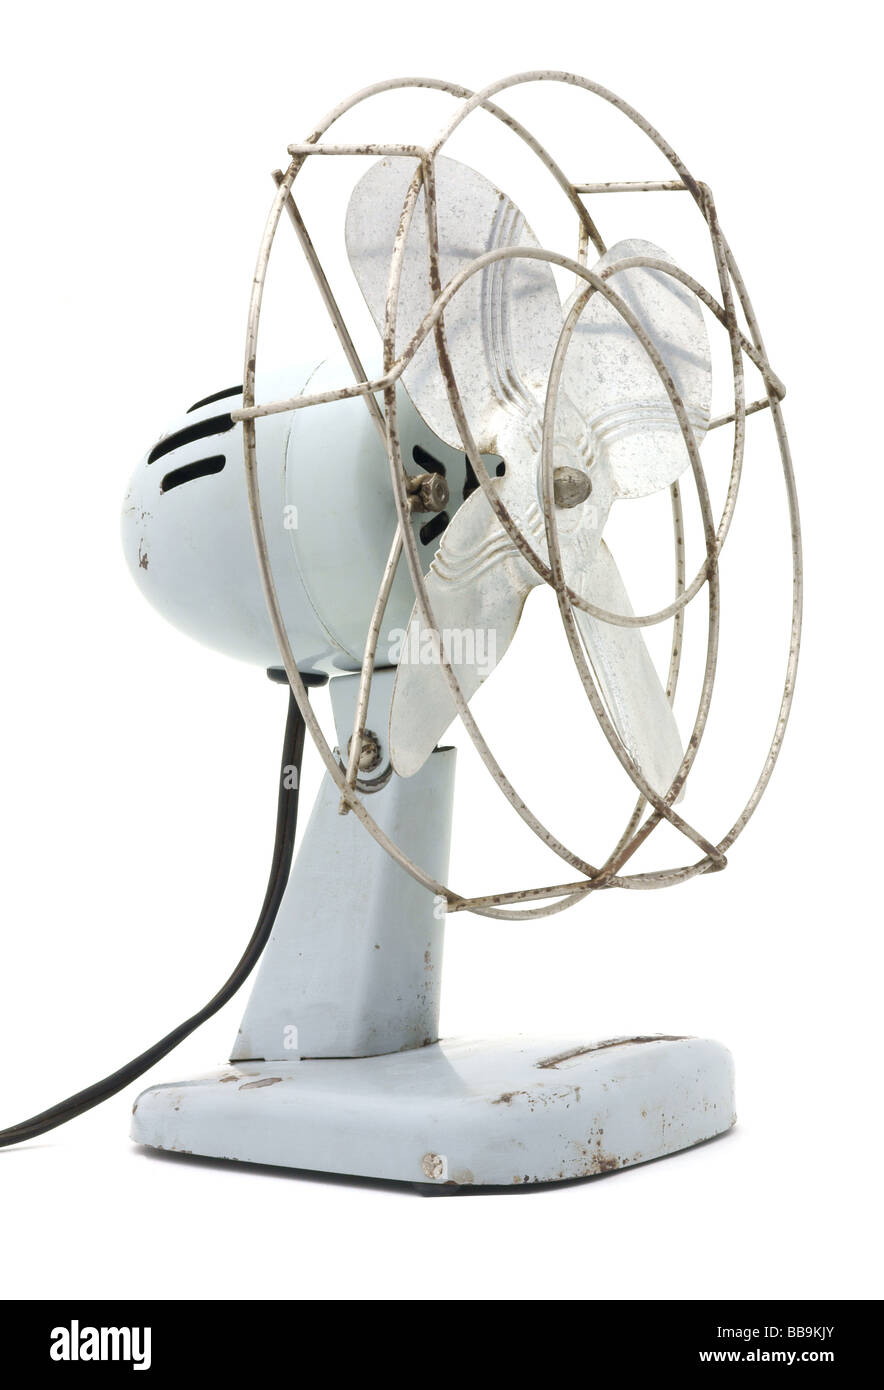 Vintage electric table fan Stock Photo